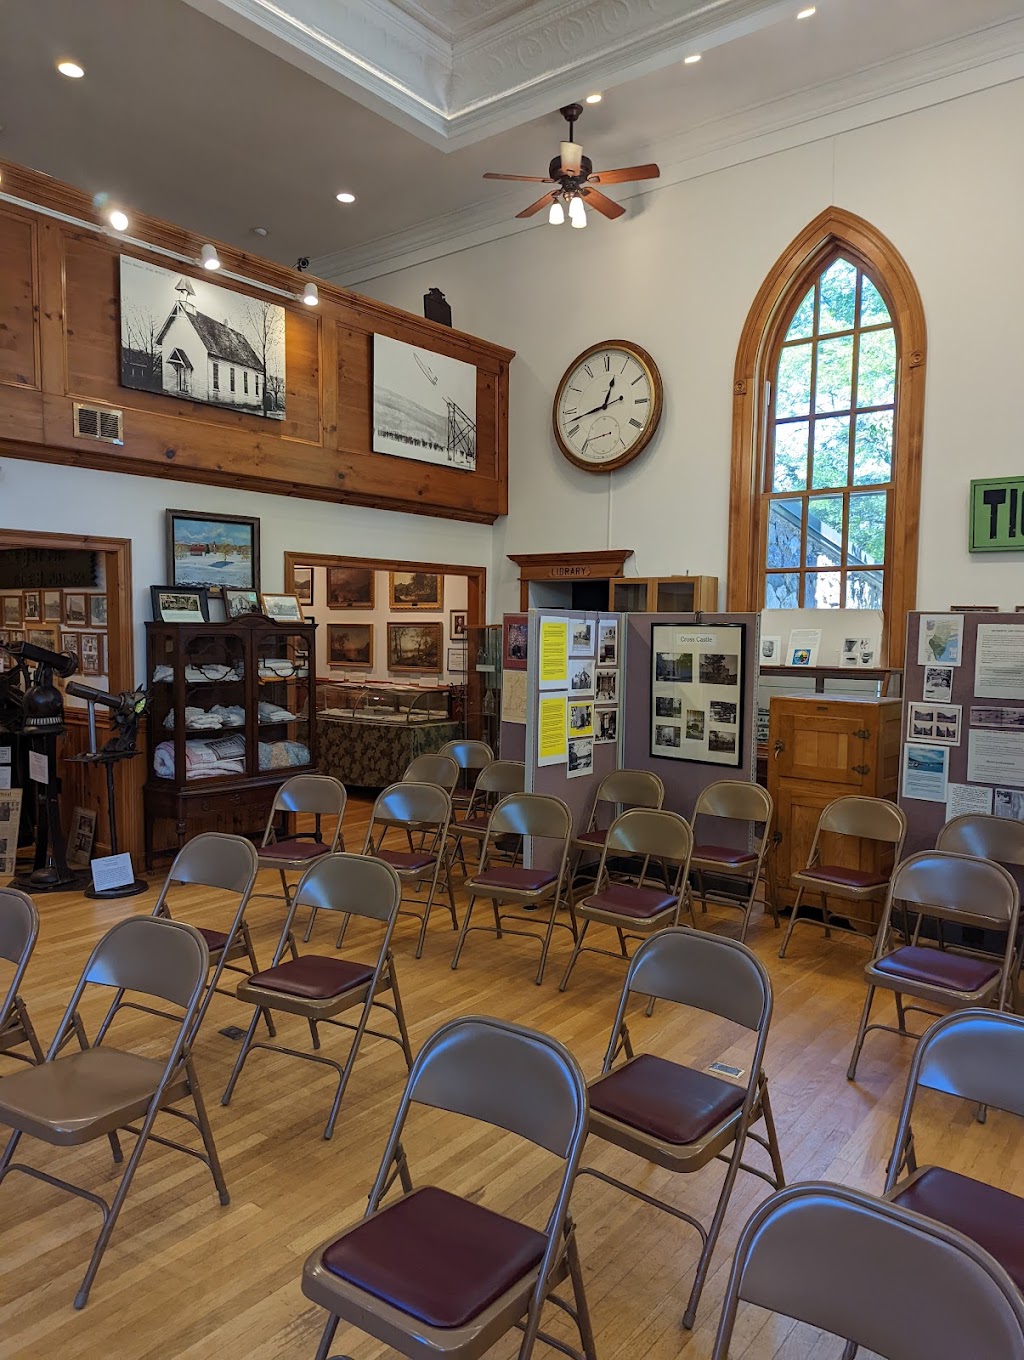 West Milford Museum | 1477 Union Valley Rd, West Milford, NJ 07480 | Phone: (973) 728-1823